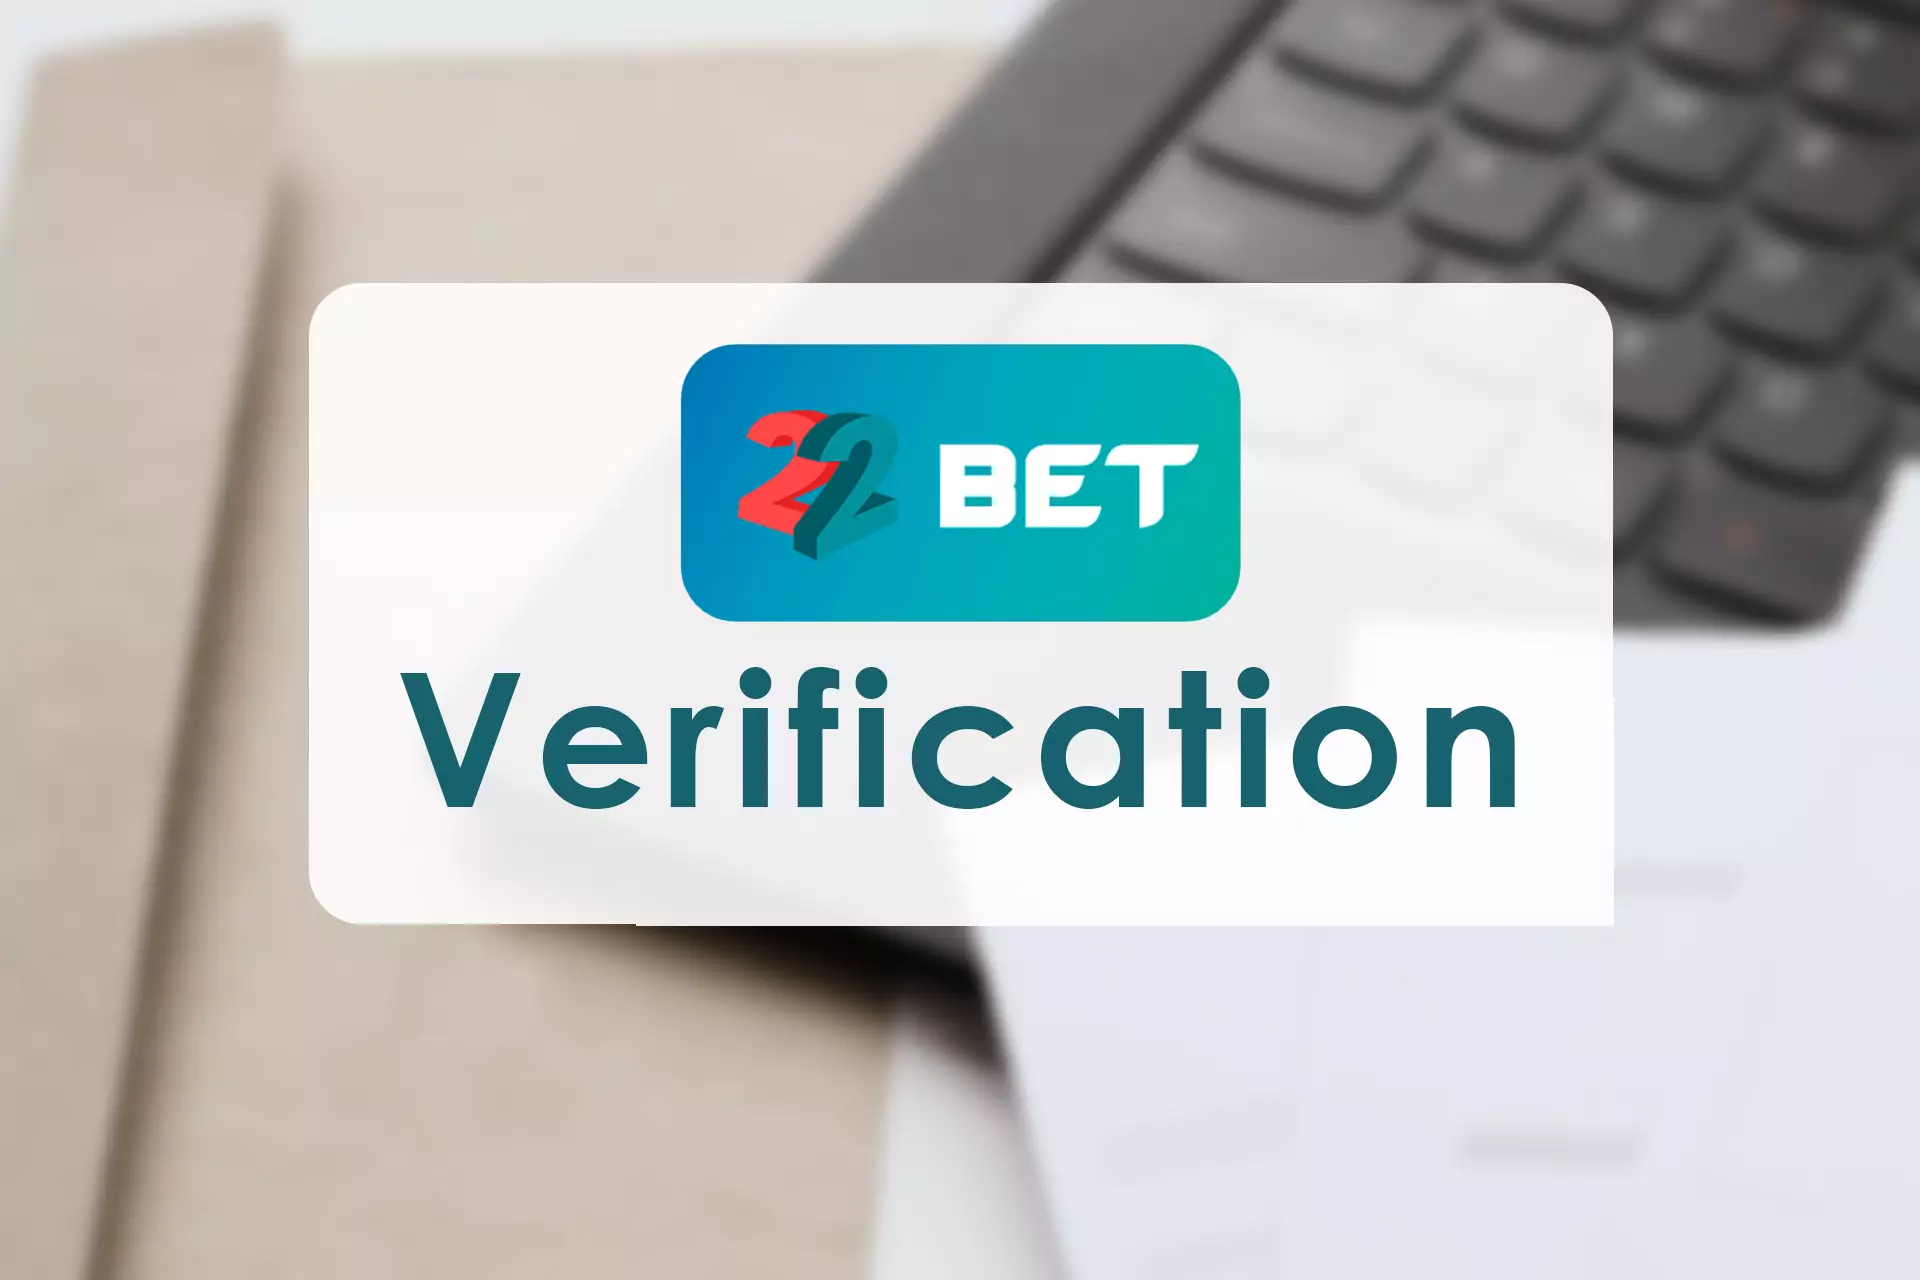 Verify your betting account with your real documents only.